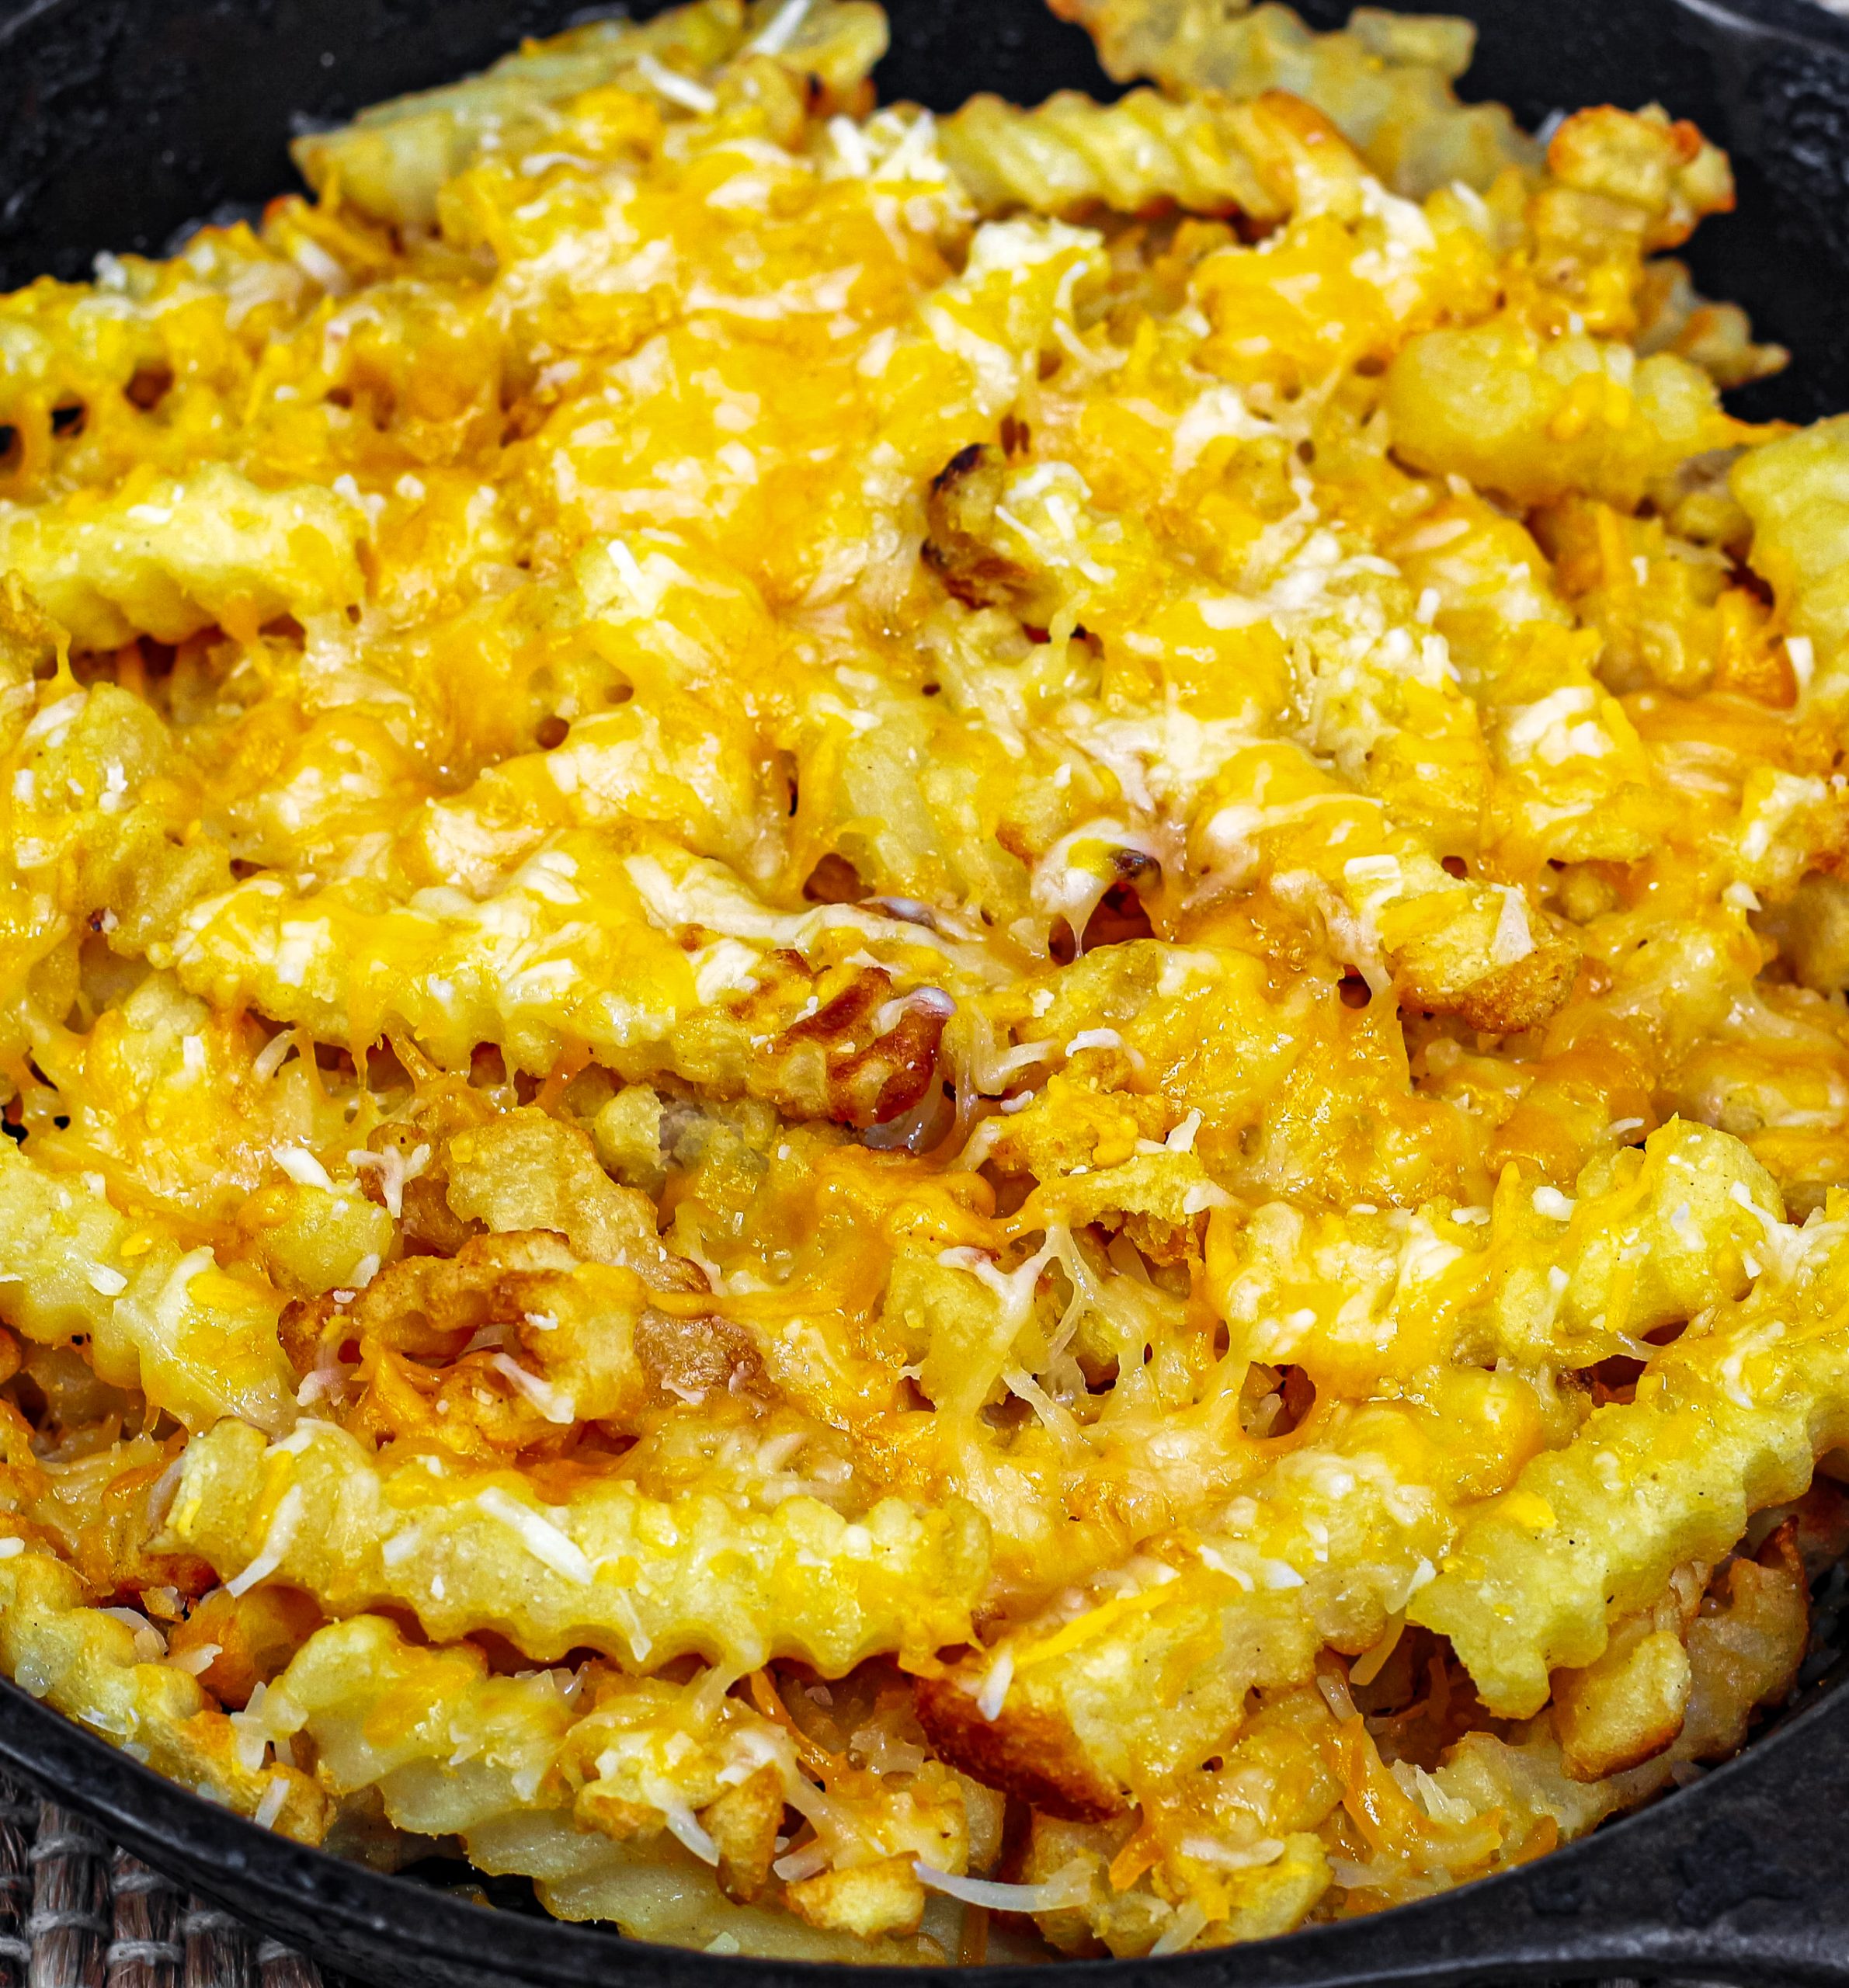 Using a castiron skillet, place the baked french fries, Mexican shredded cheese, and diced carne asada, then broil until the cheese is melted.